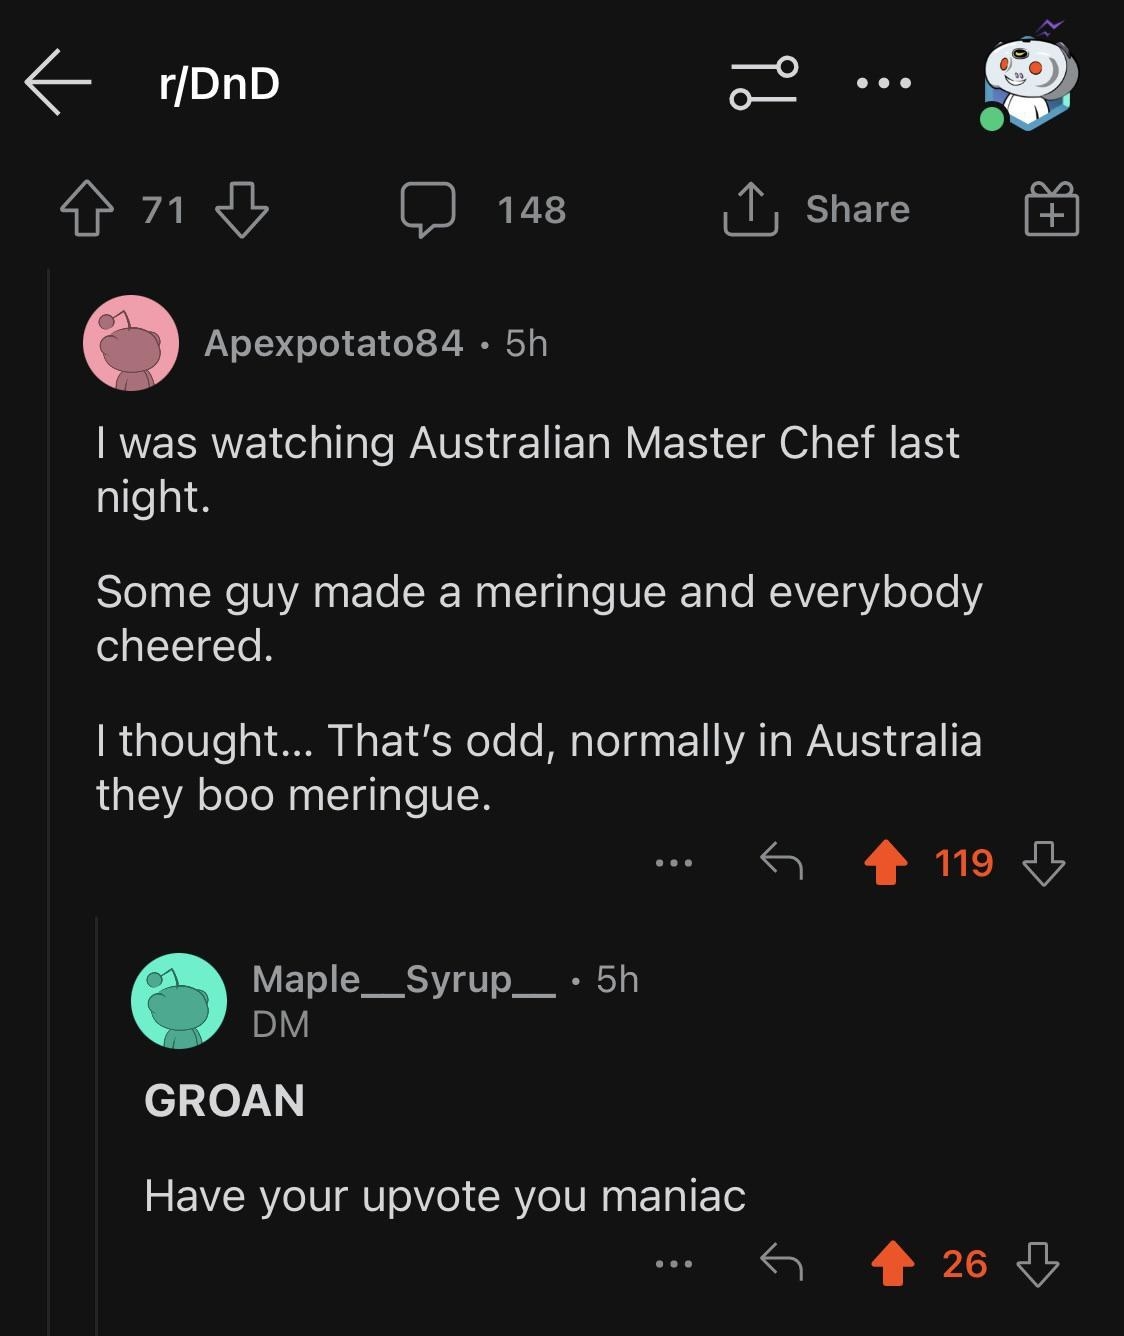 Someone was watching Australian Master Chef and some guy made a meringue and everybody cheered, and they thought &quot;That&#x27;s odd, normally in Australia they boo meringue&quot; and comment is &quot;Groan, have your upvote you maniac&quot;